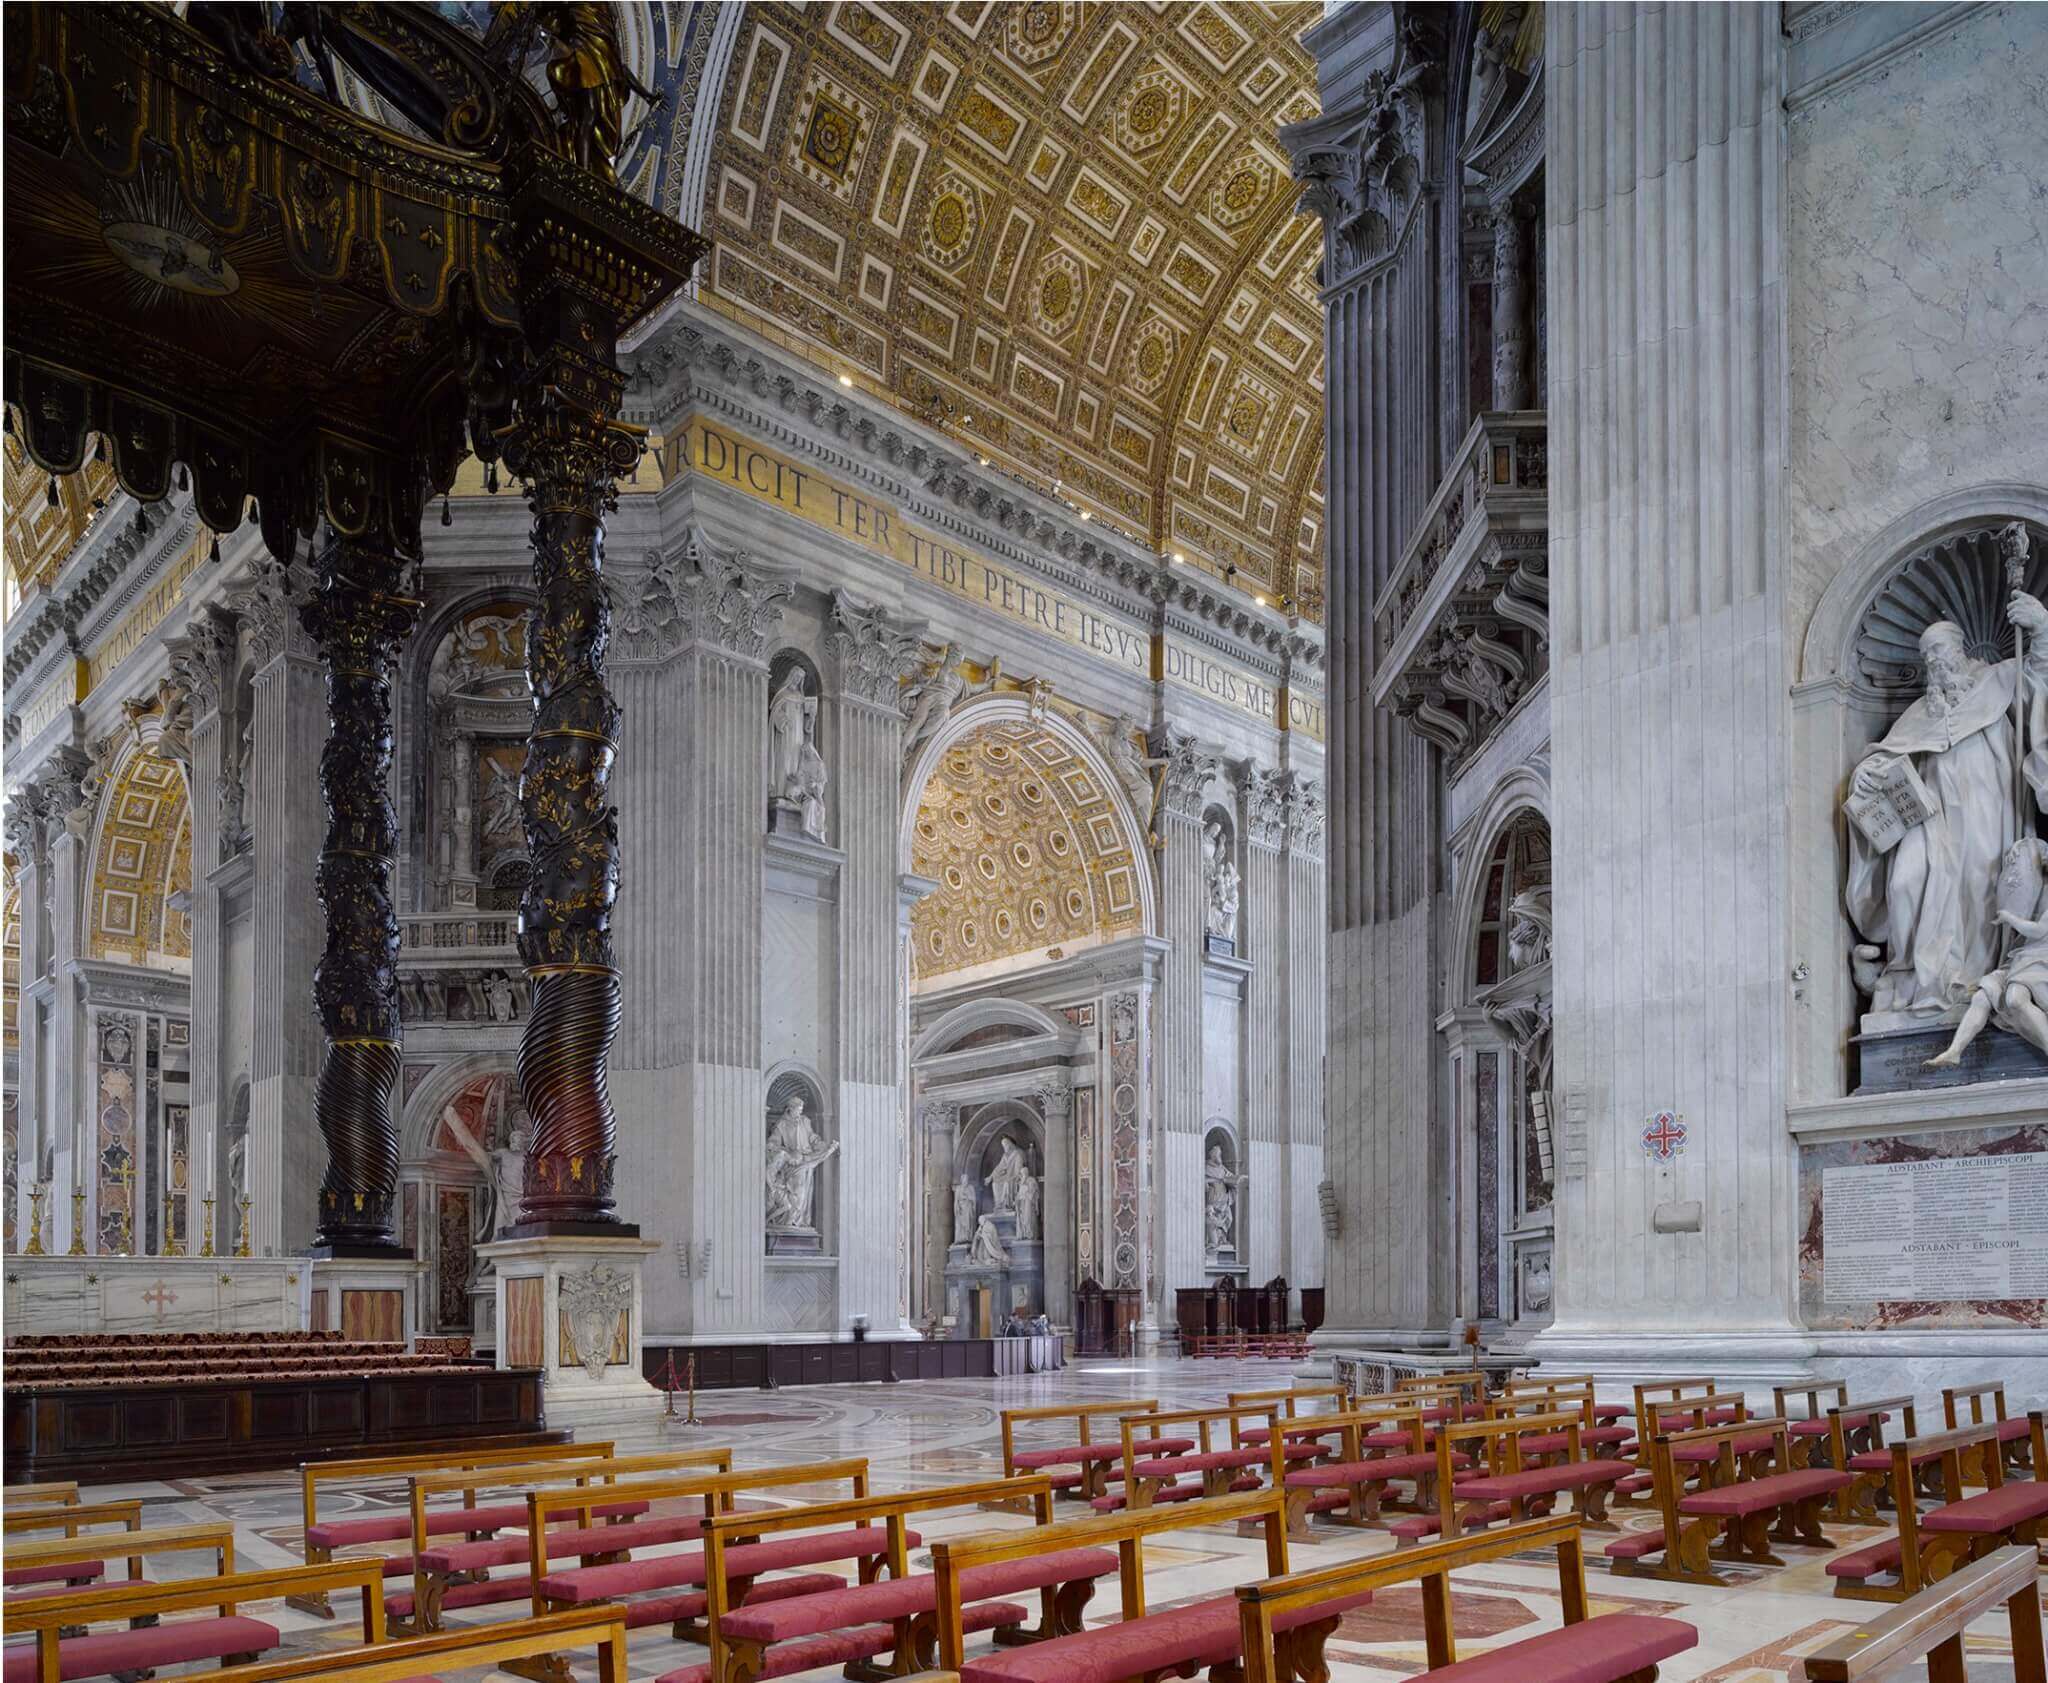 interior of Saint Peter’s Basilica with rows chairs and gold ceiling